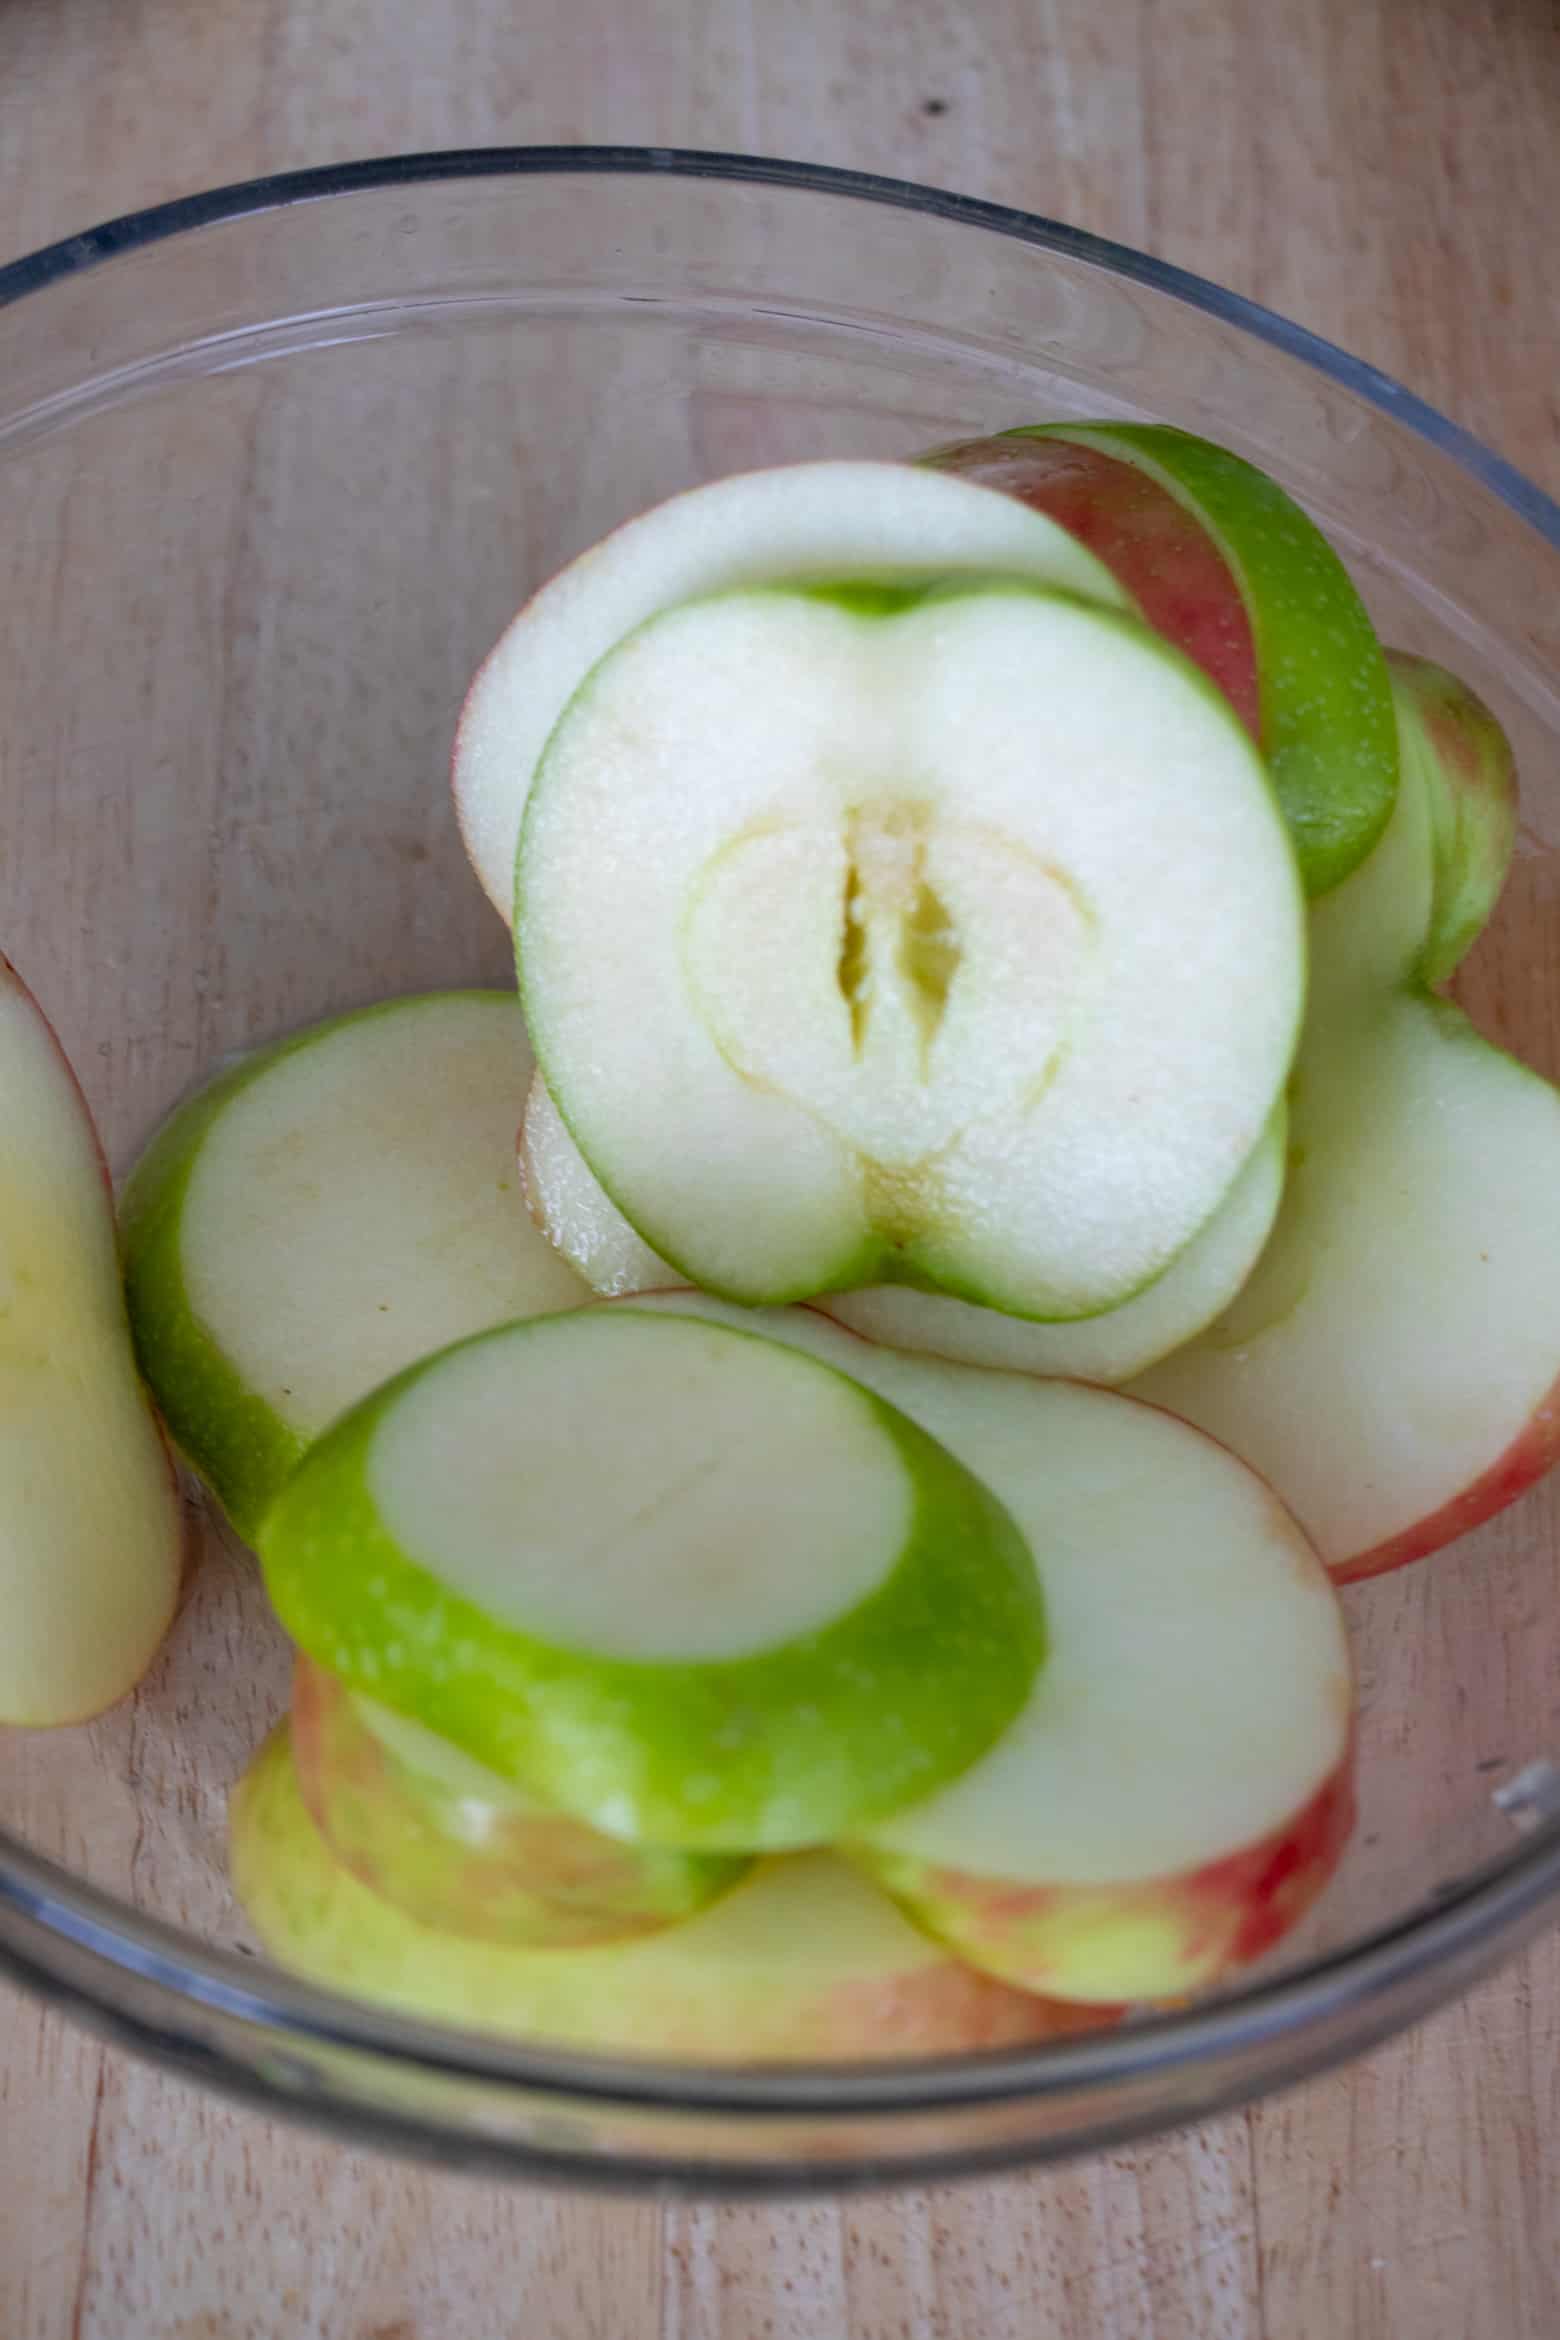 Sliced apples in a bowl covered with lemon juice.